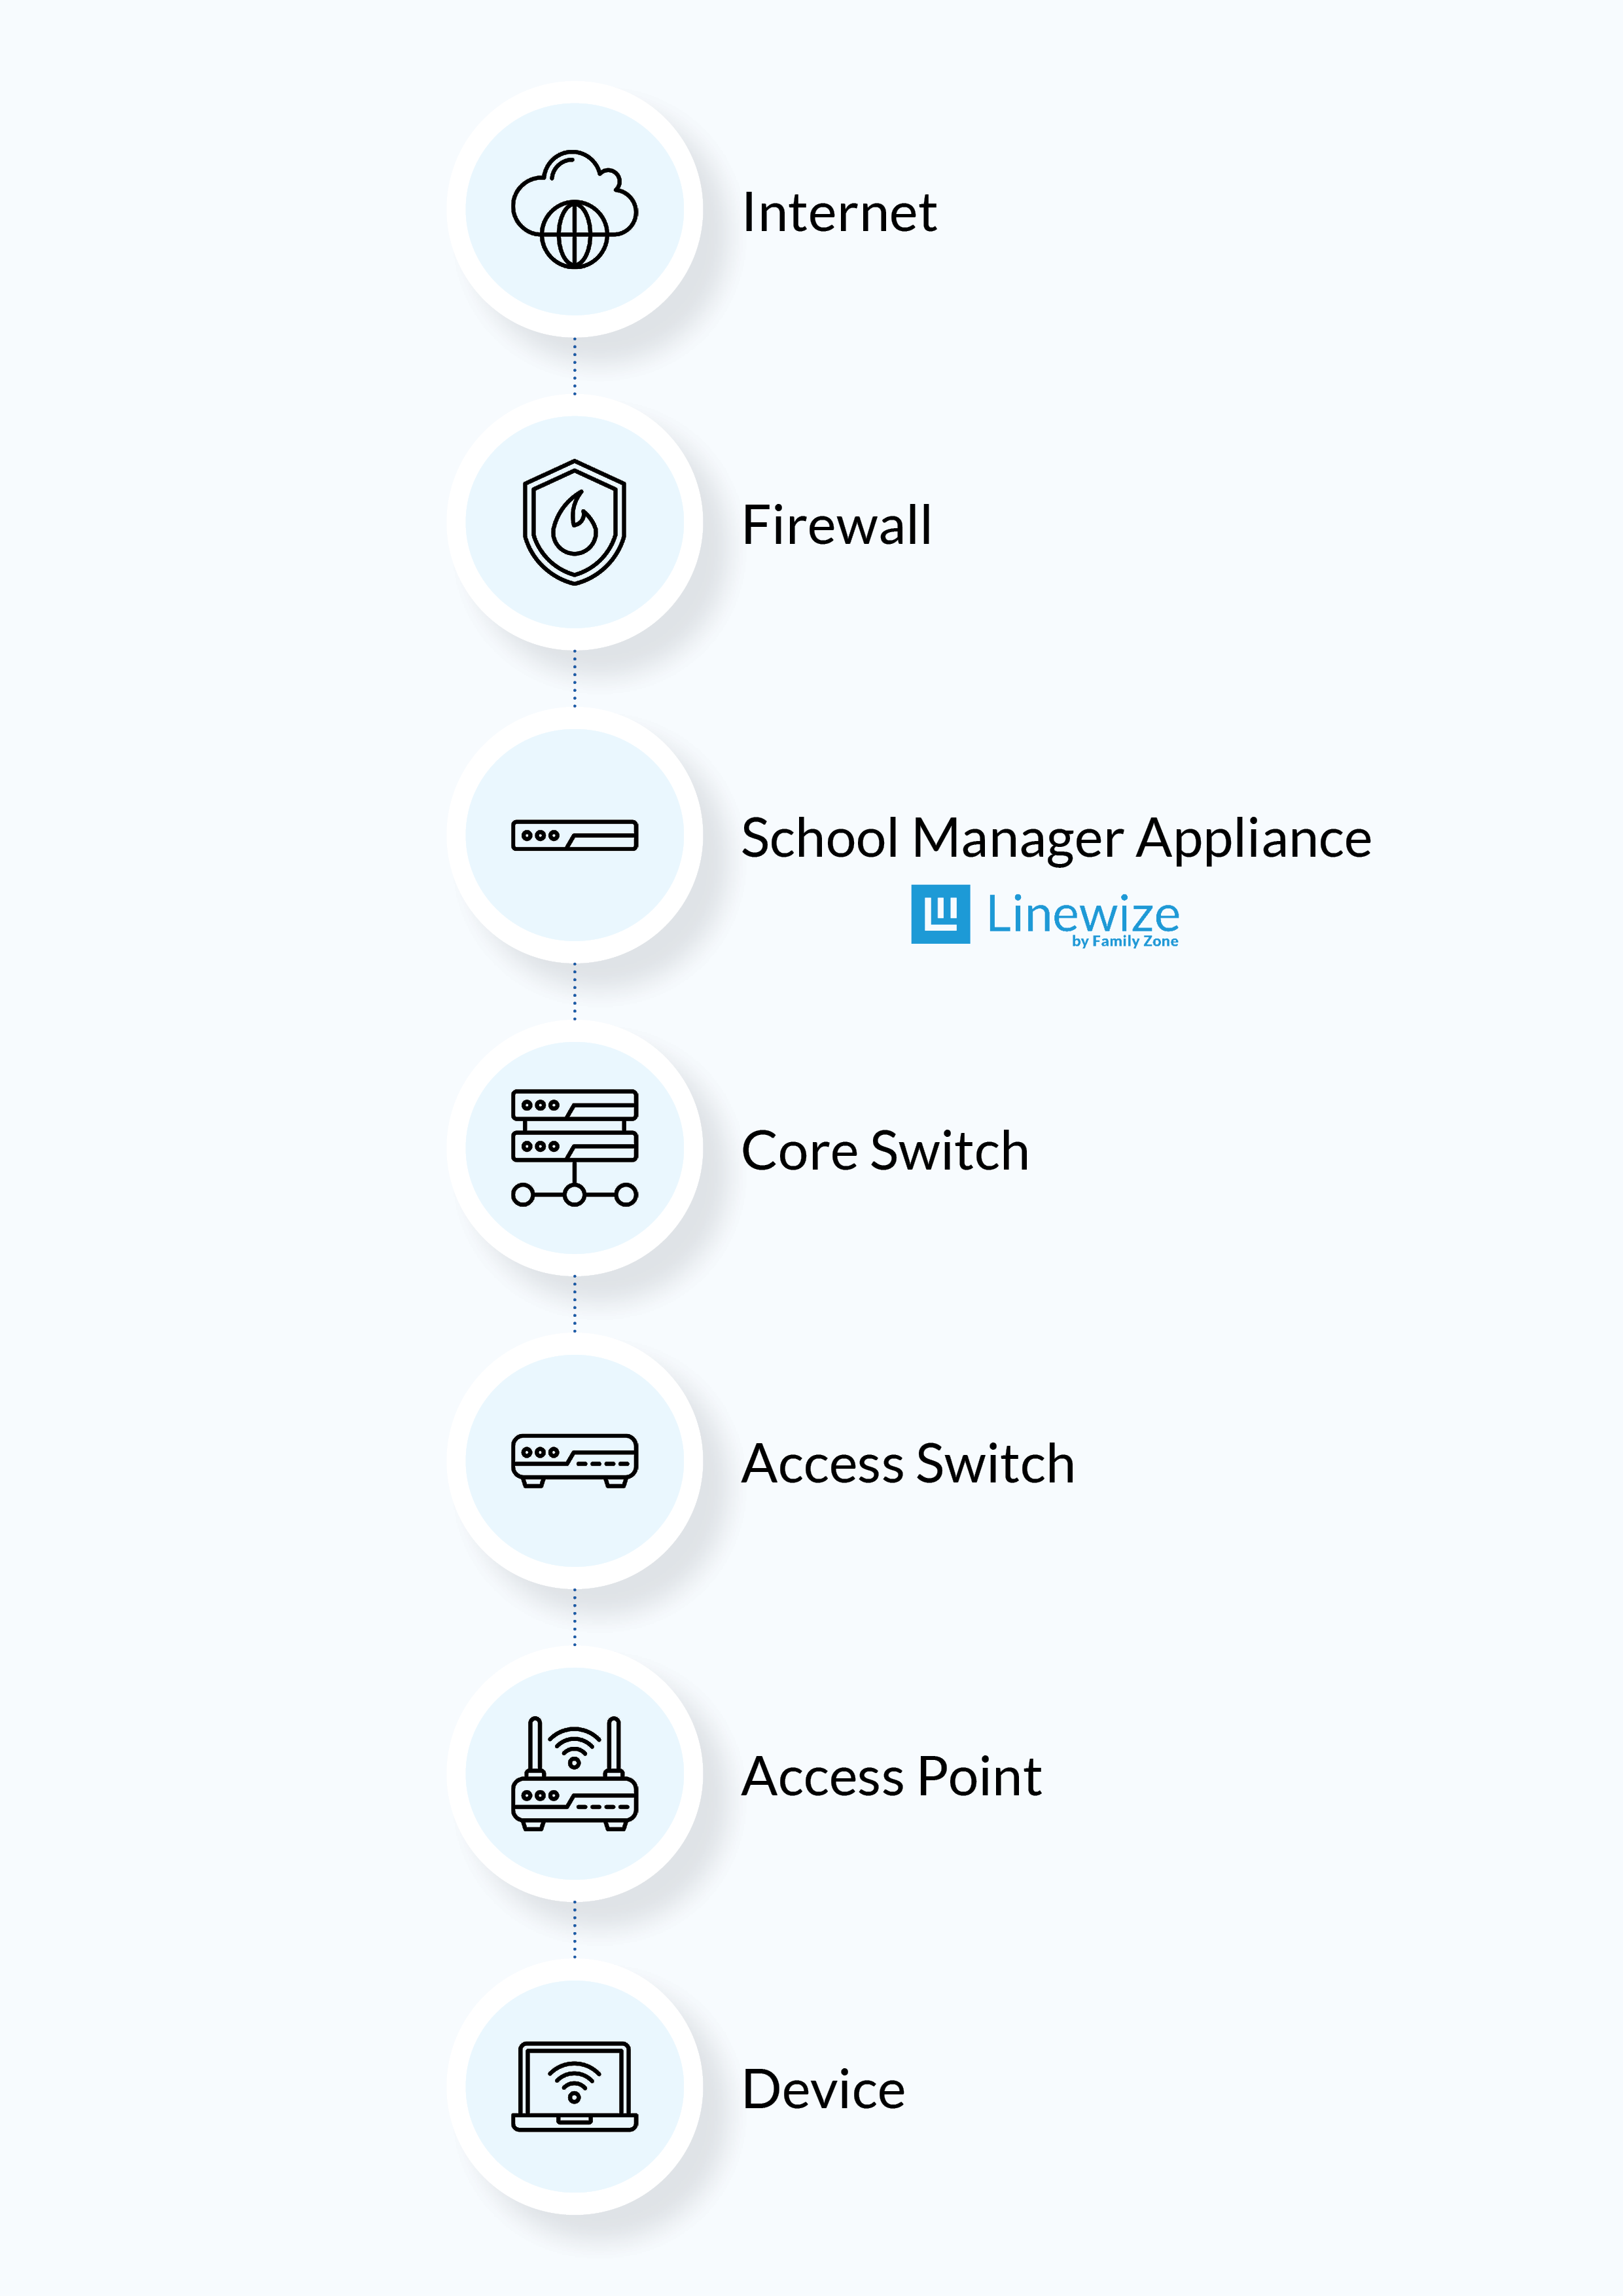 School Manager physical appliance in a network